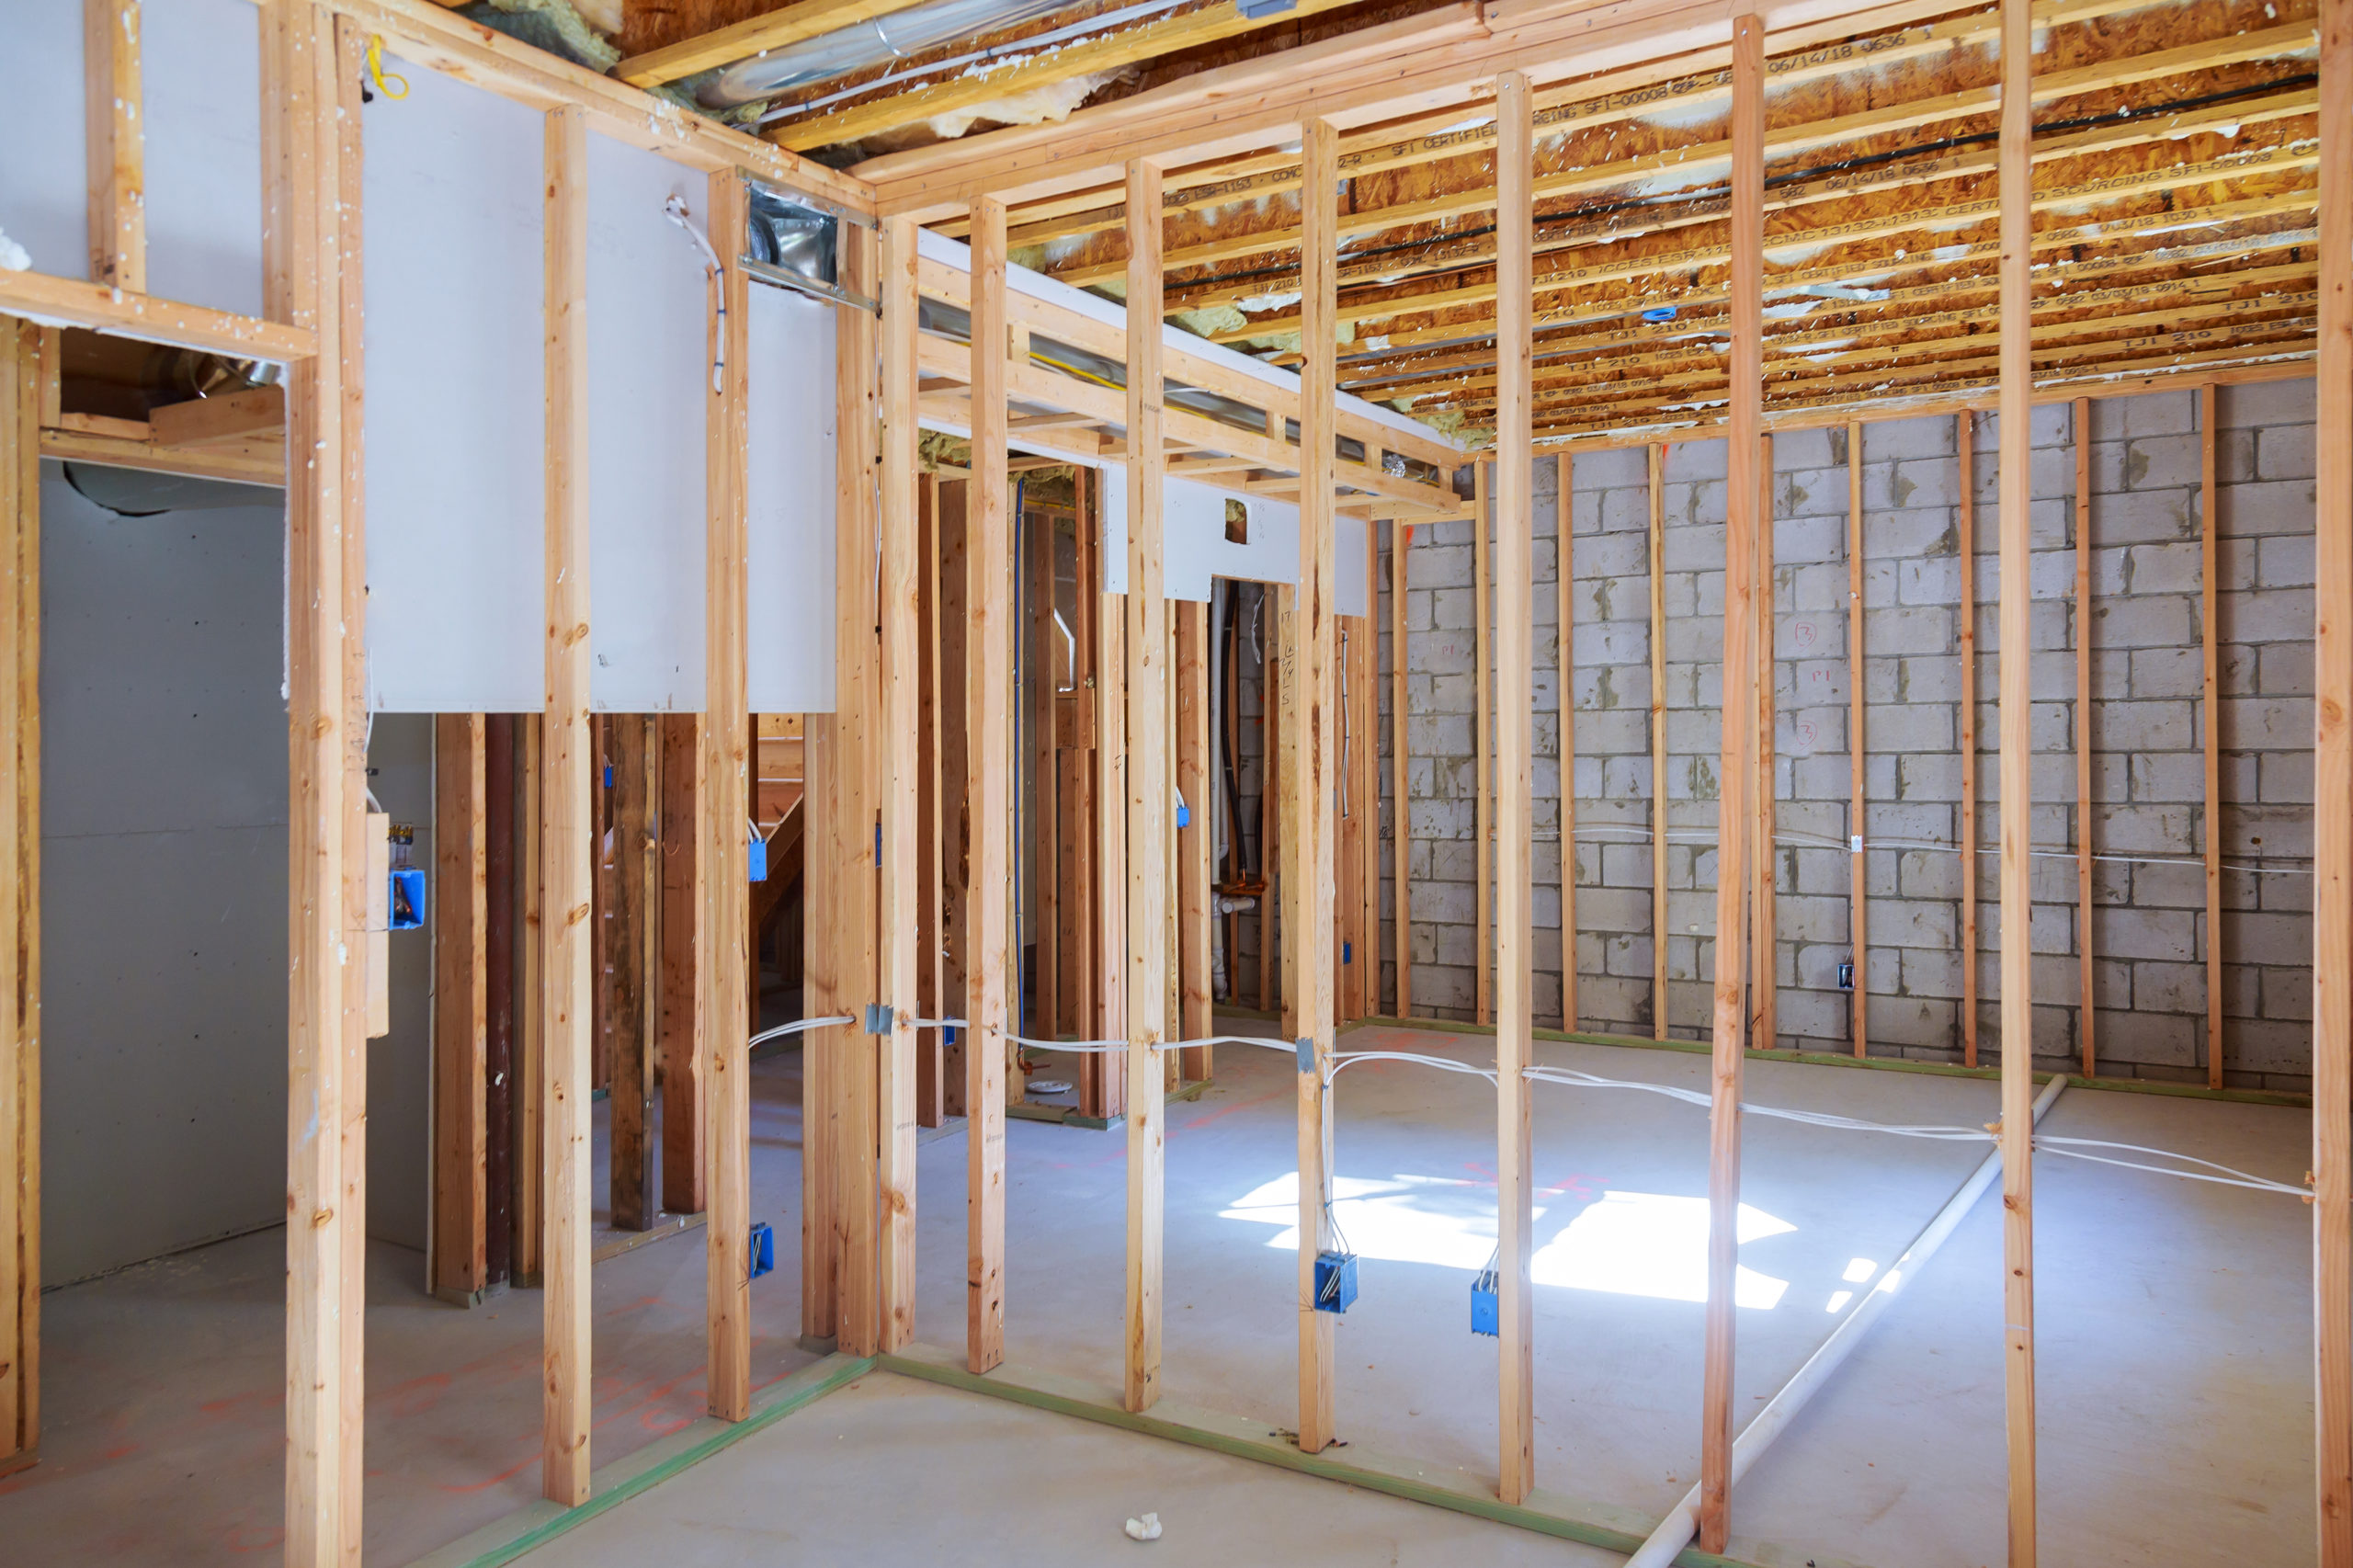 New under construction home framing unfinished wood frame building of a basement residential